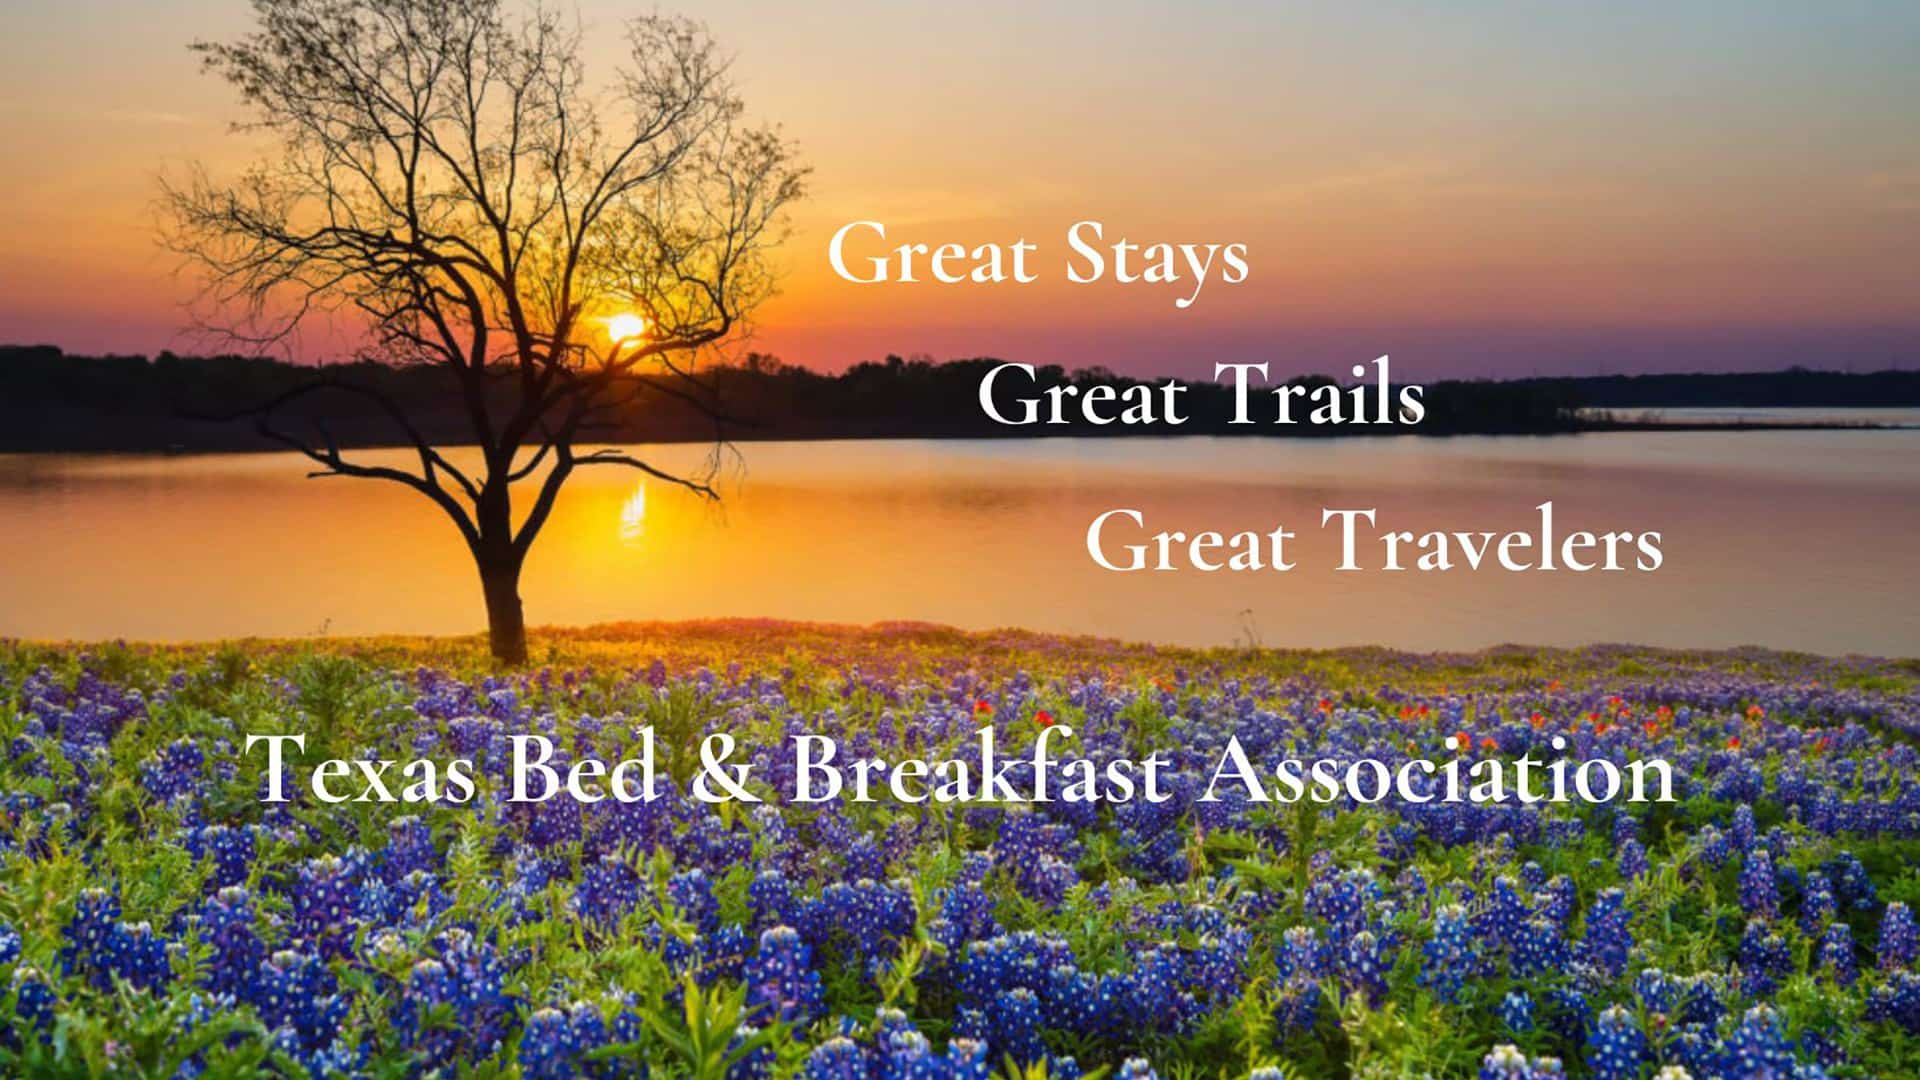 Sillhoutte of tree with no leaves surrounded by a field of blue flowers with setting sun in the background and white text stating Great Stays Great Trails Great Travelers Texas Bed & Breakfast Association